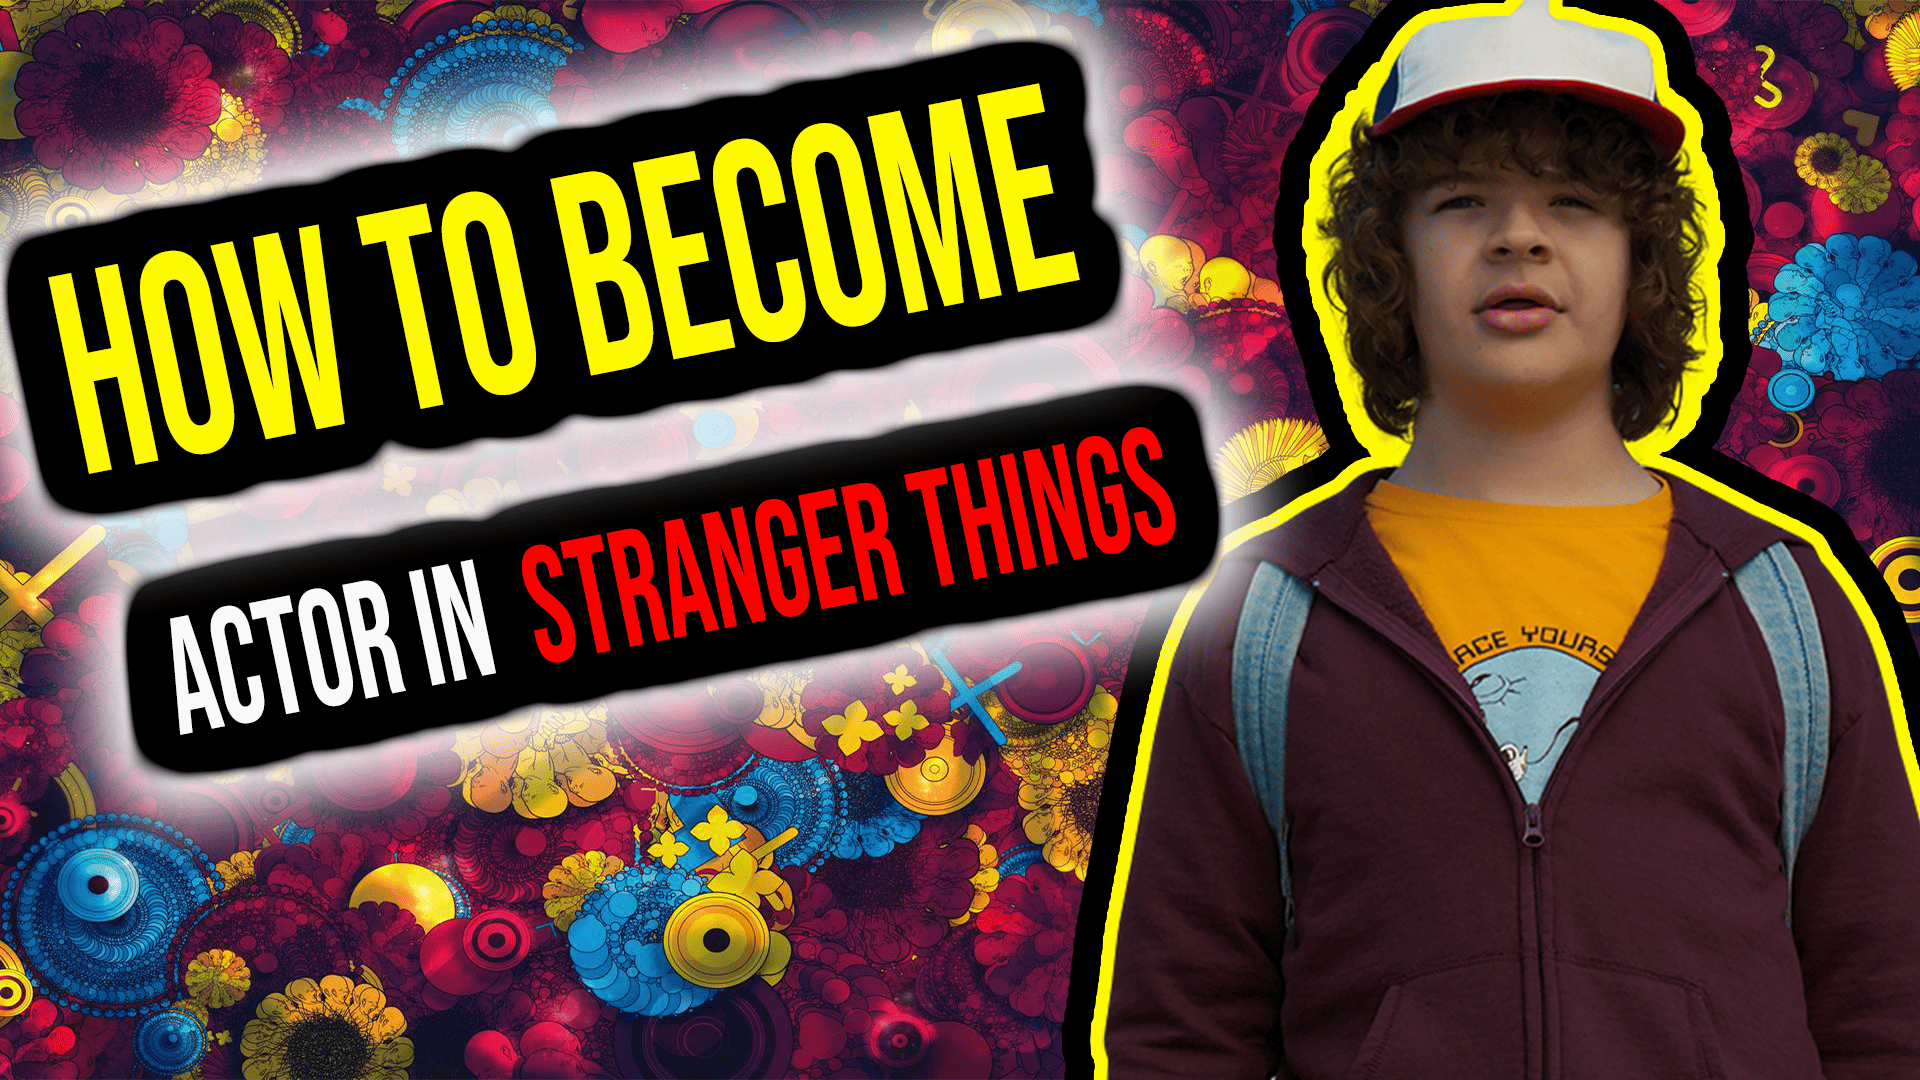 How To Be An Actor On 'Stranger Things': Your Step-by-Step Guide